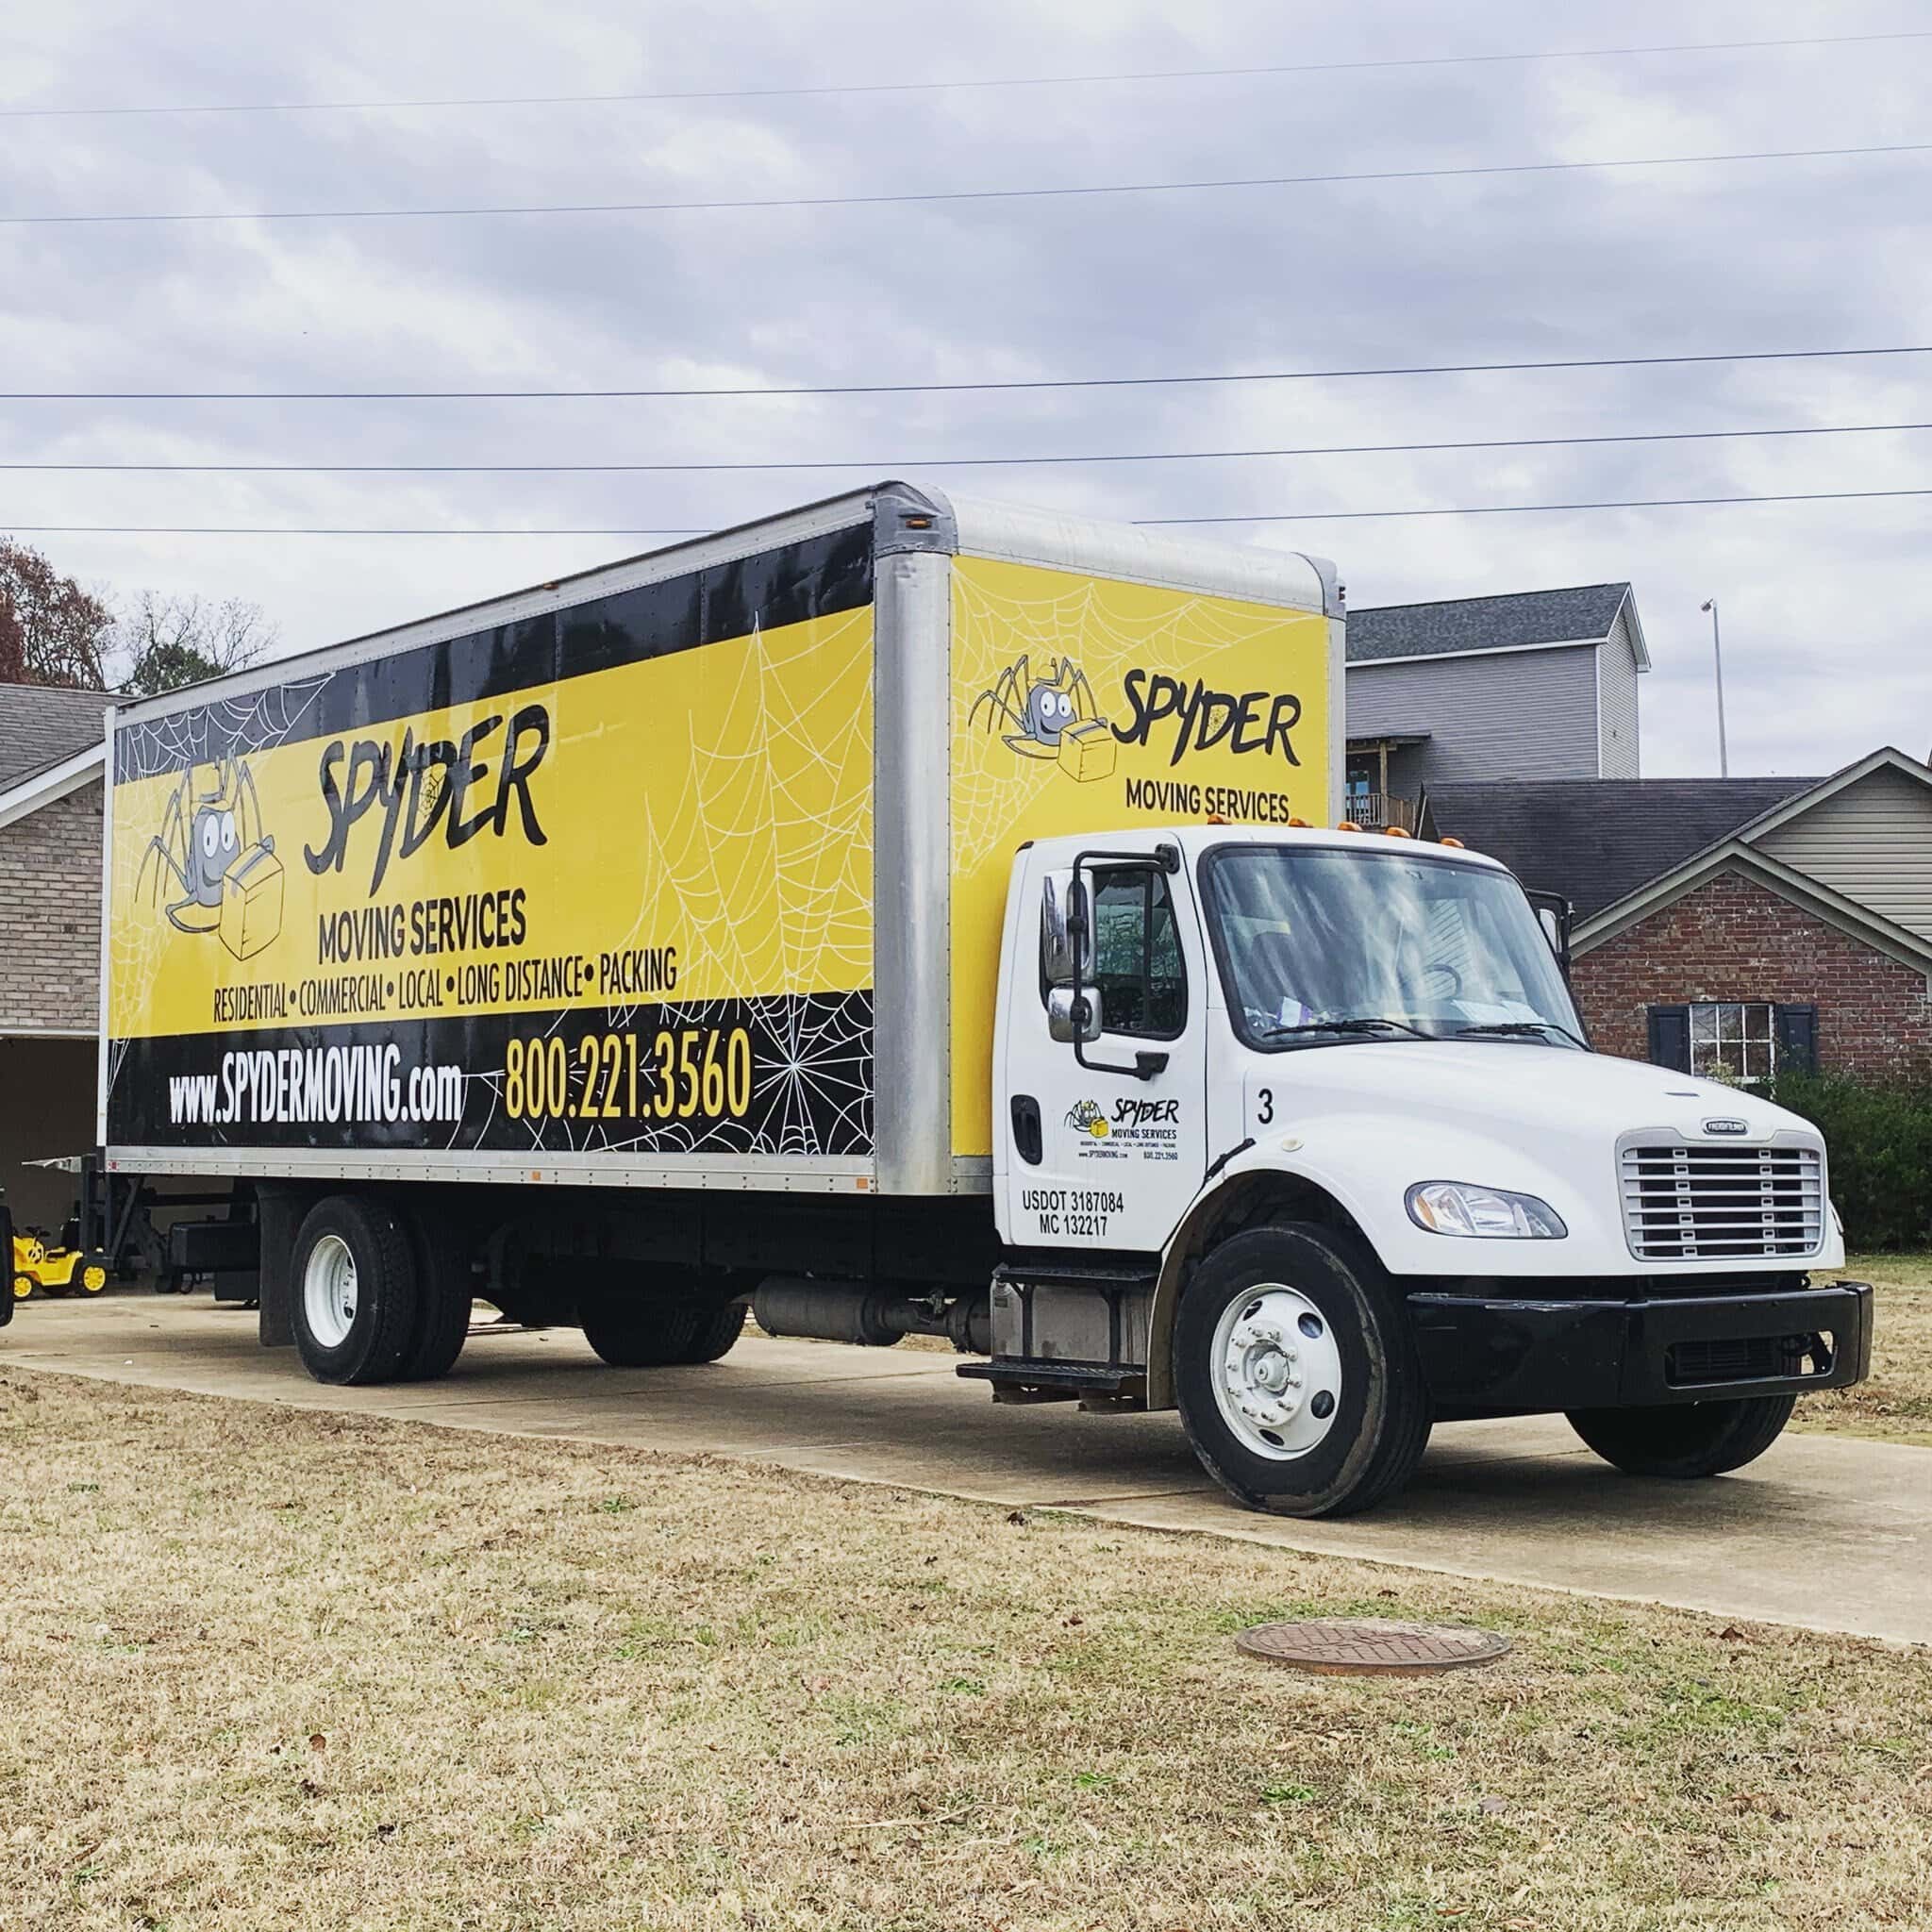 Spyder Moving Services - Oxford, MS, US, movers in mississippi